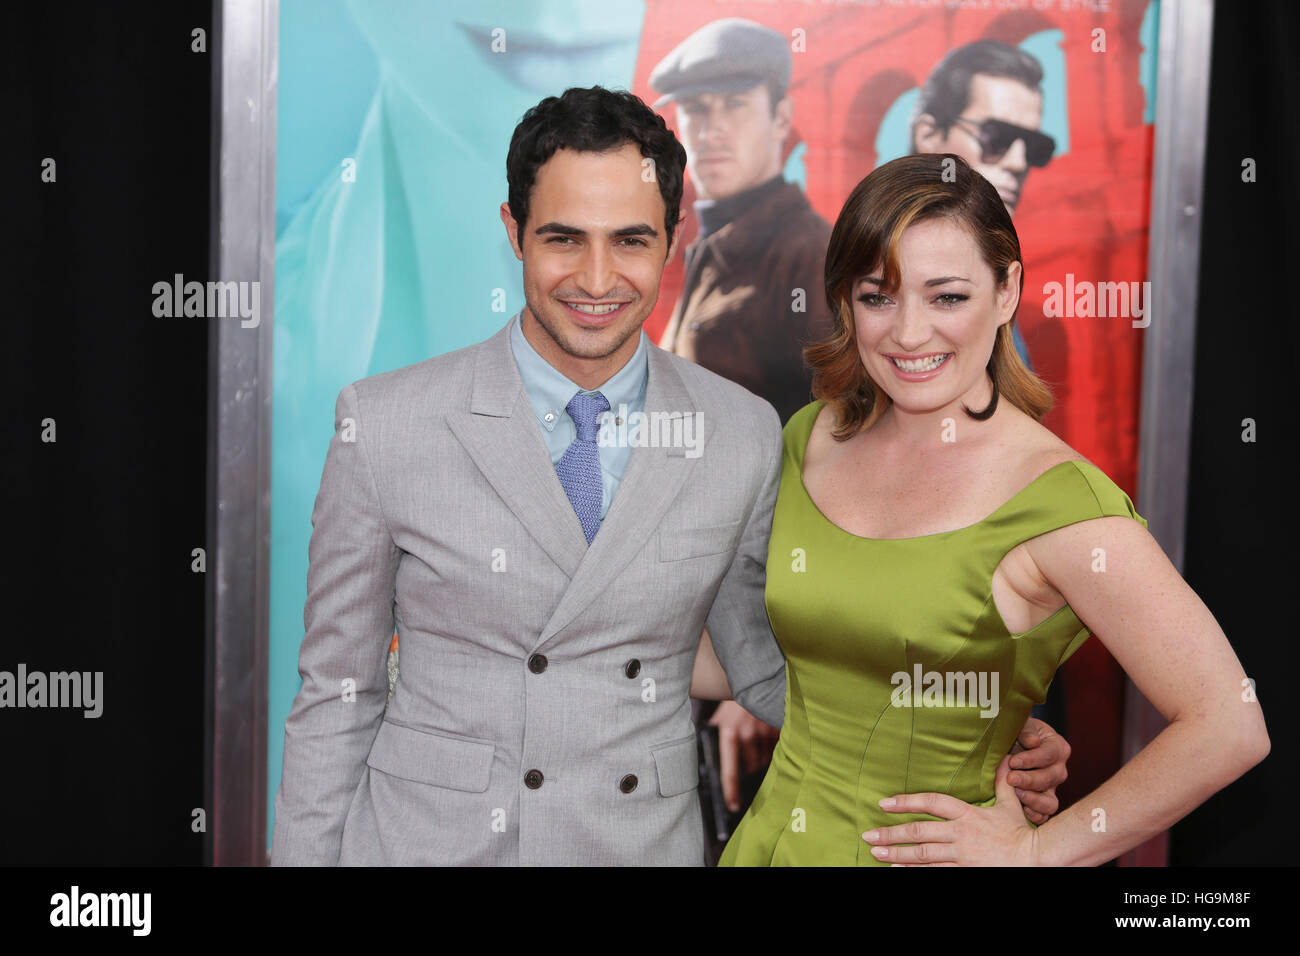 Laura Michelle Kelly, Zac Posen arrives at The Man From U.N.C.L.E premiere at the Zigfield Theater in NYC. Stock Photo